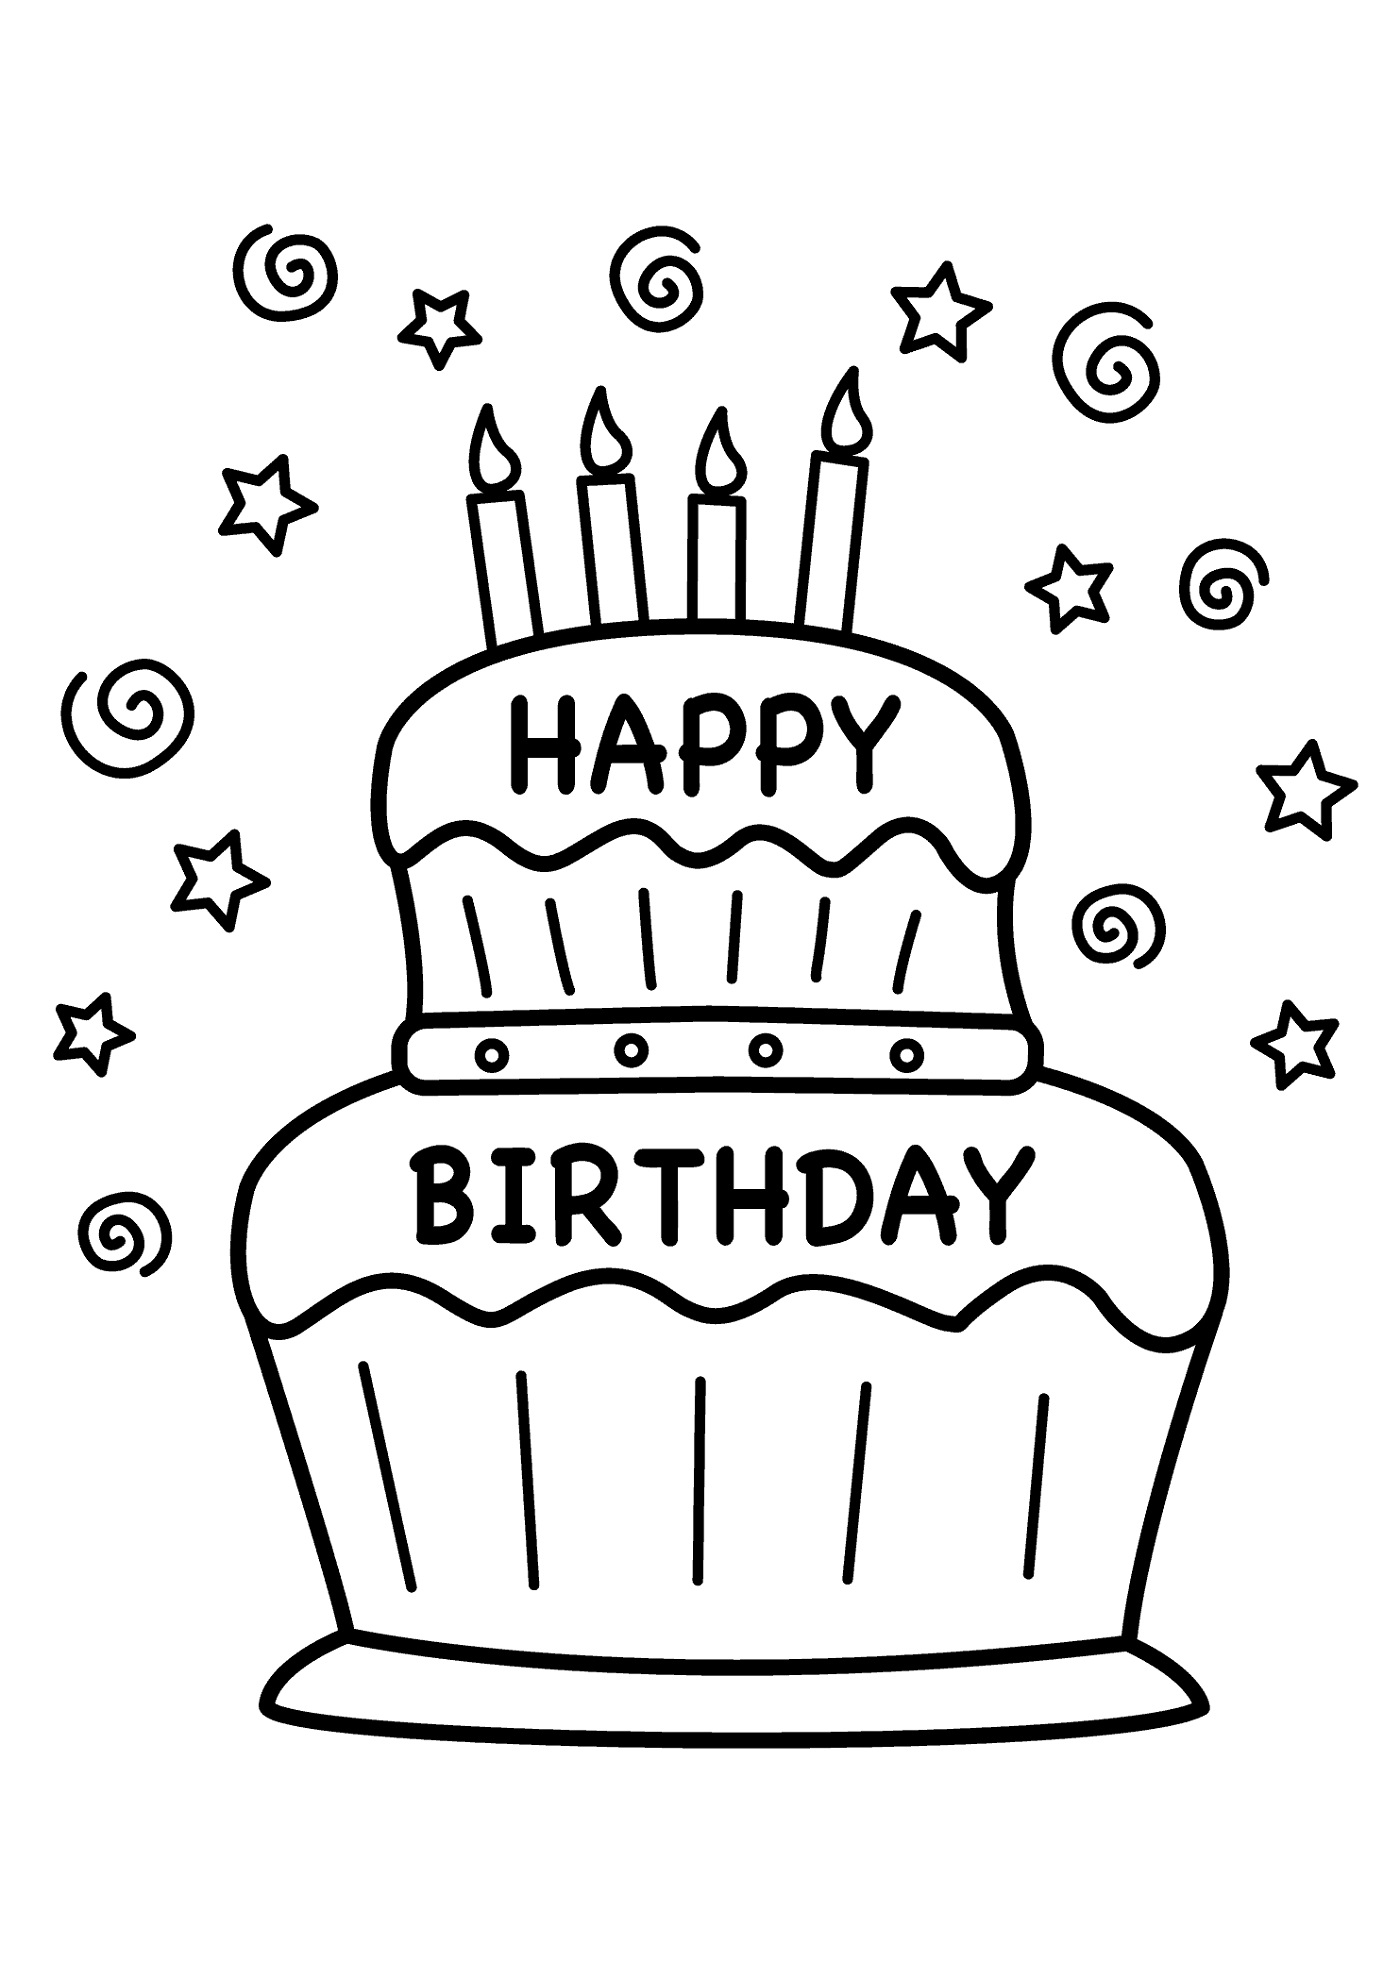 Printable Birthday Card Coloring Pages | 101 Activity